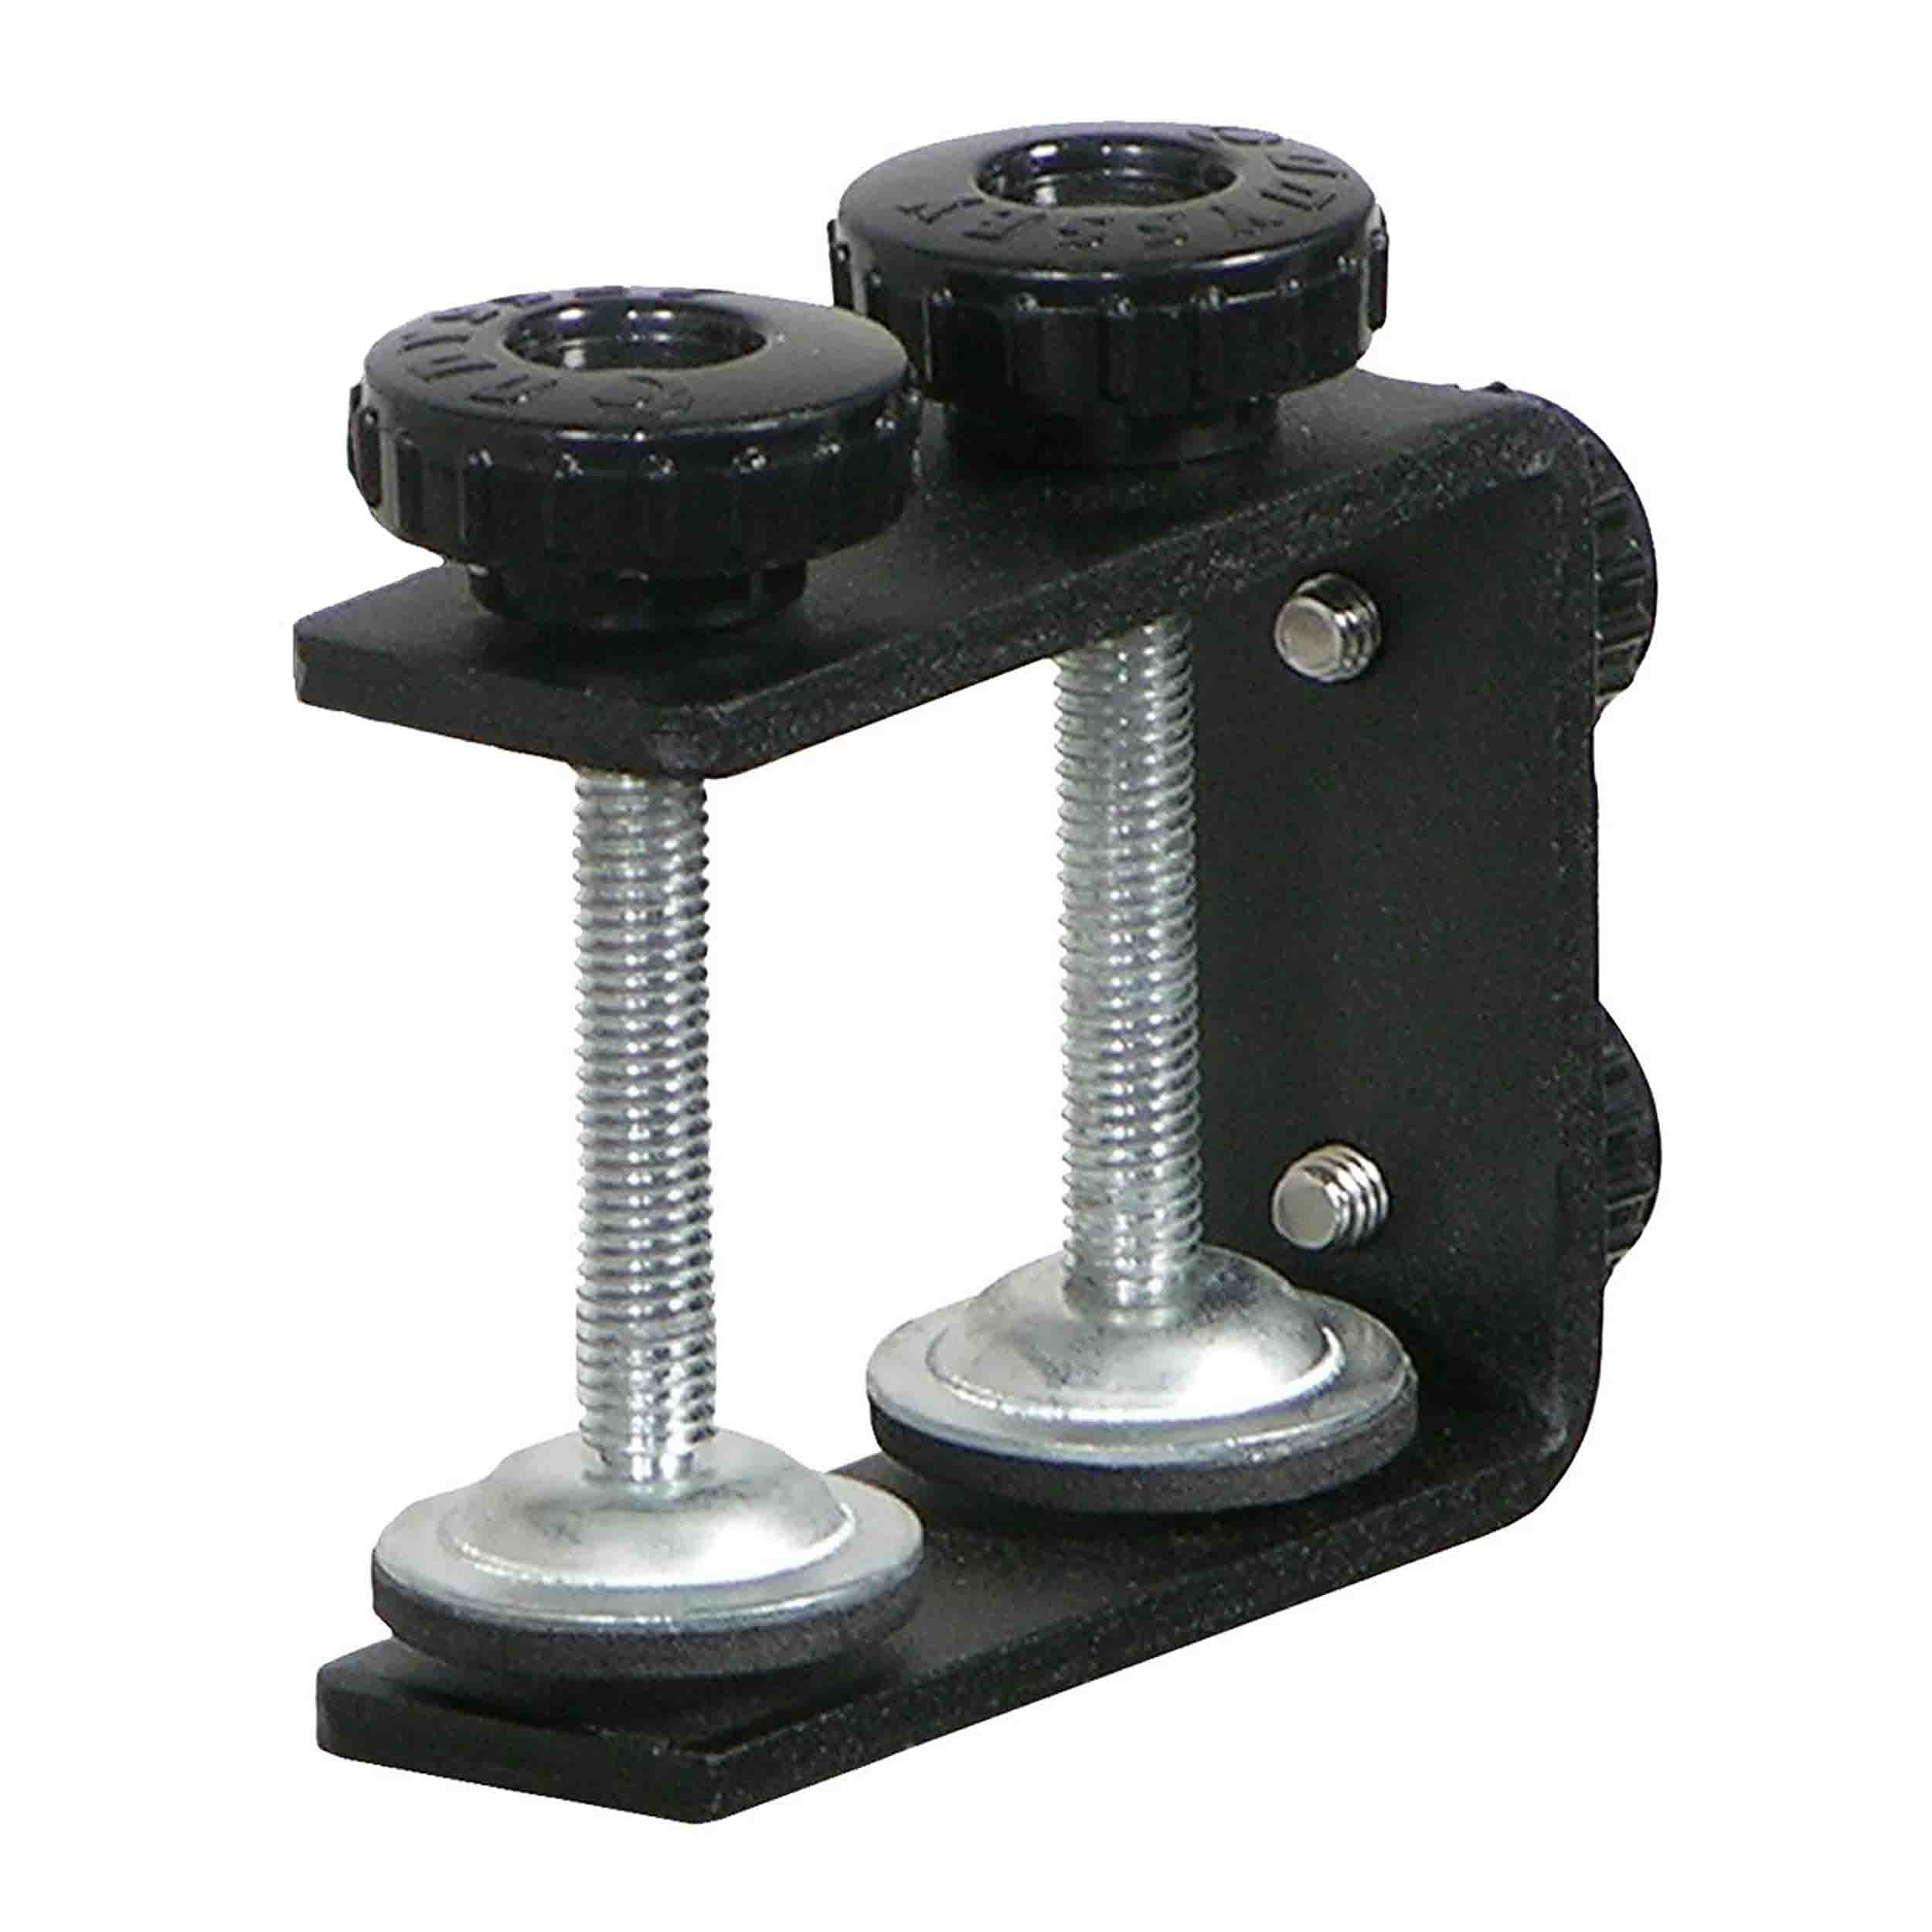 Odyssey LSTANDCLAMPS Single Clamp for Laptop Stands - Black (Sold Individually) - Hollywood DJ